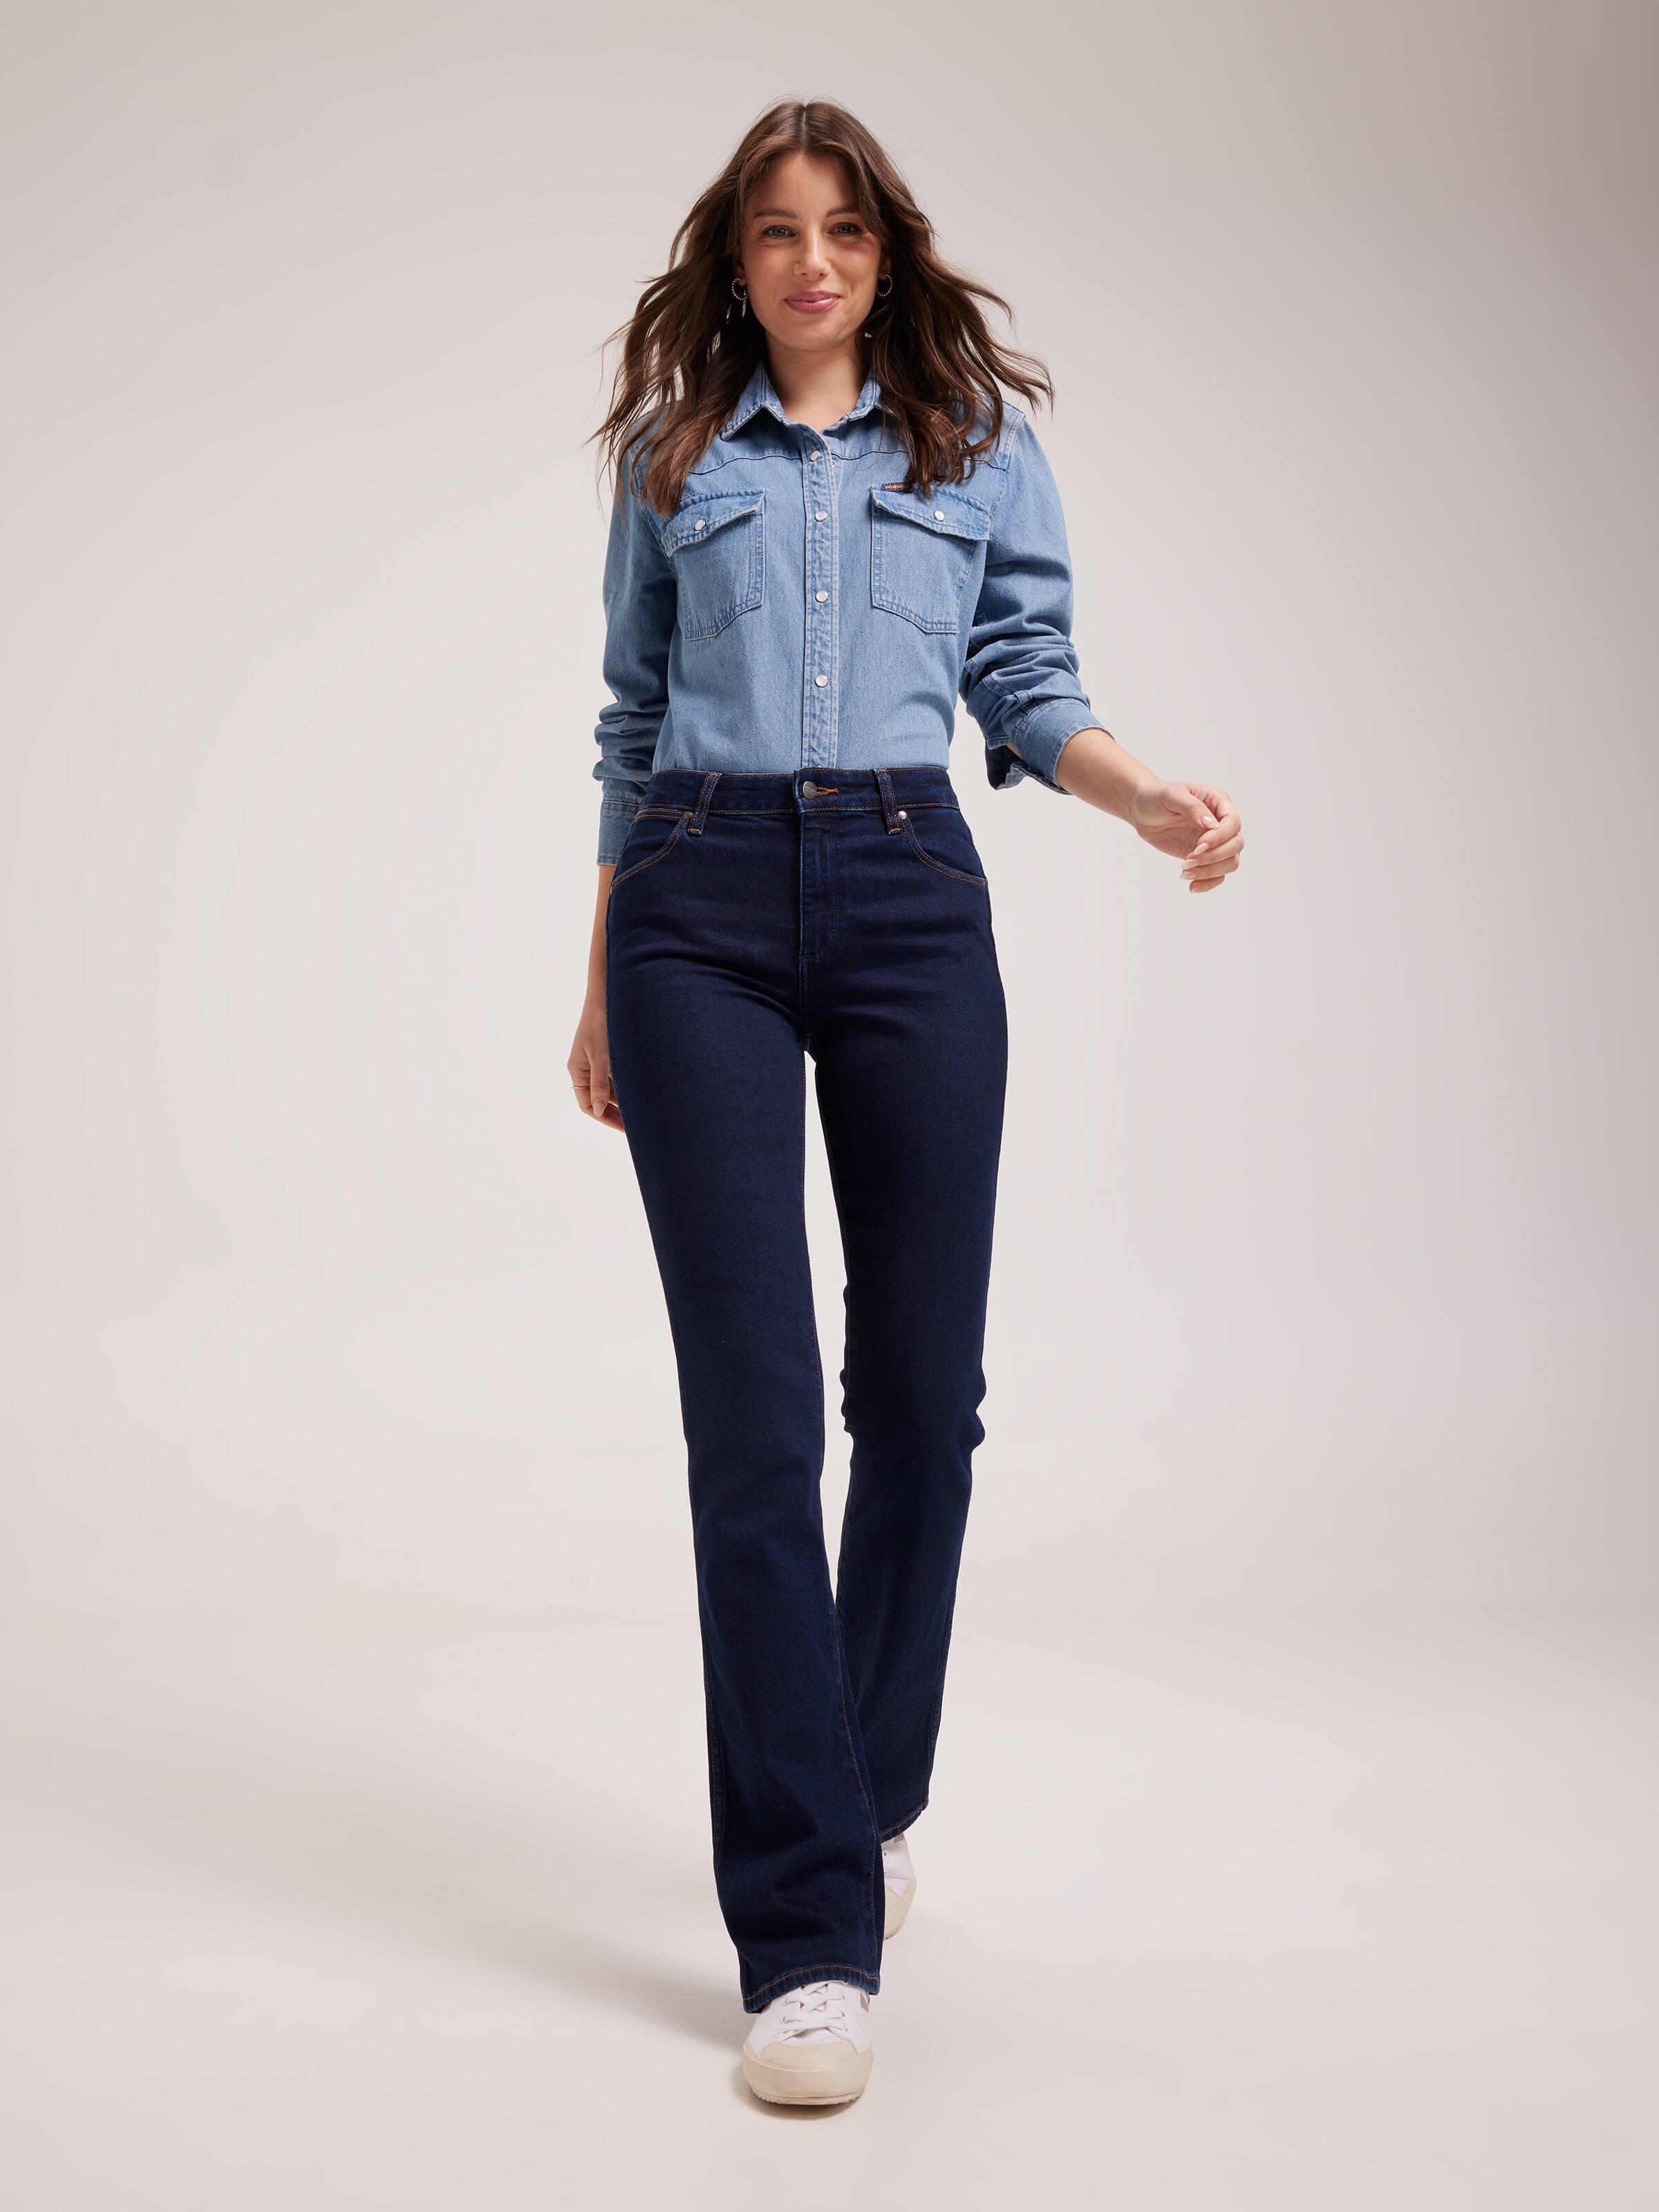 Womens Flared Jeans Australia, Cropped Flare Jeans